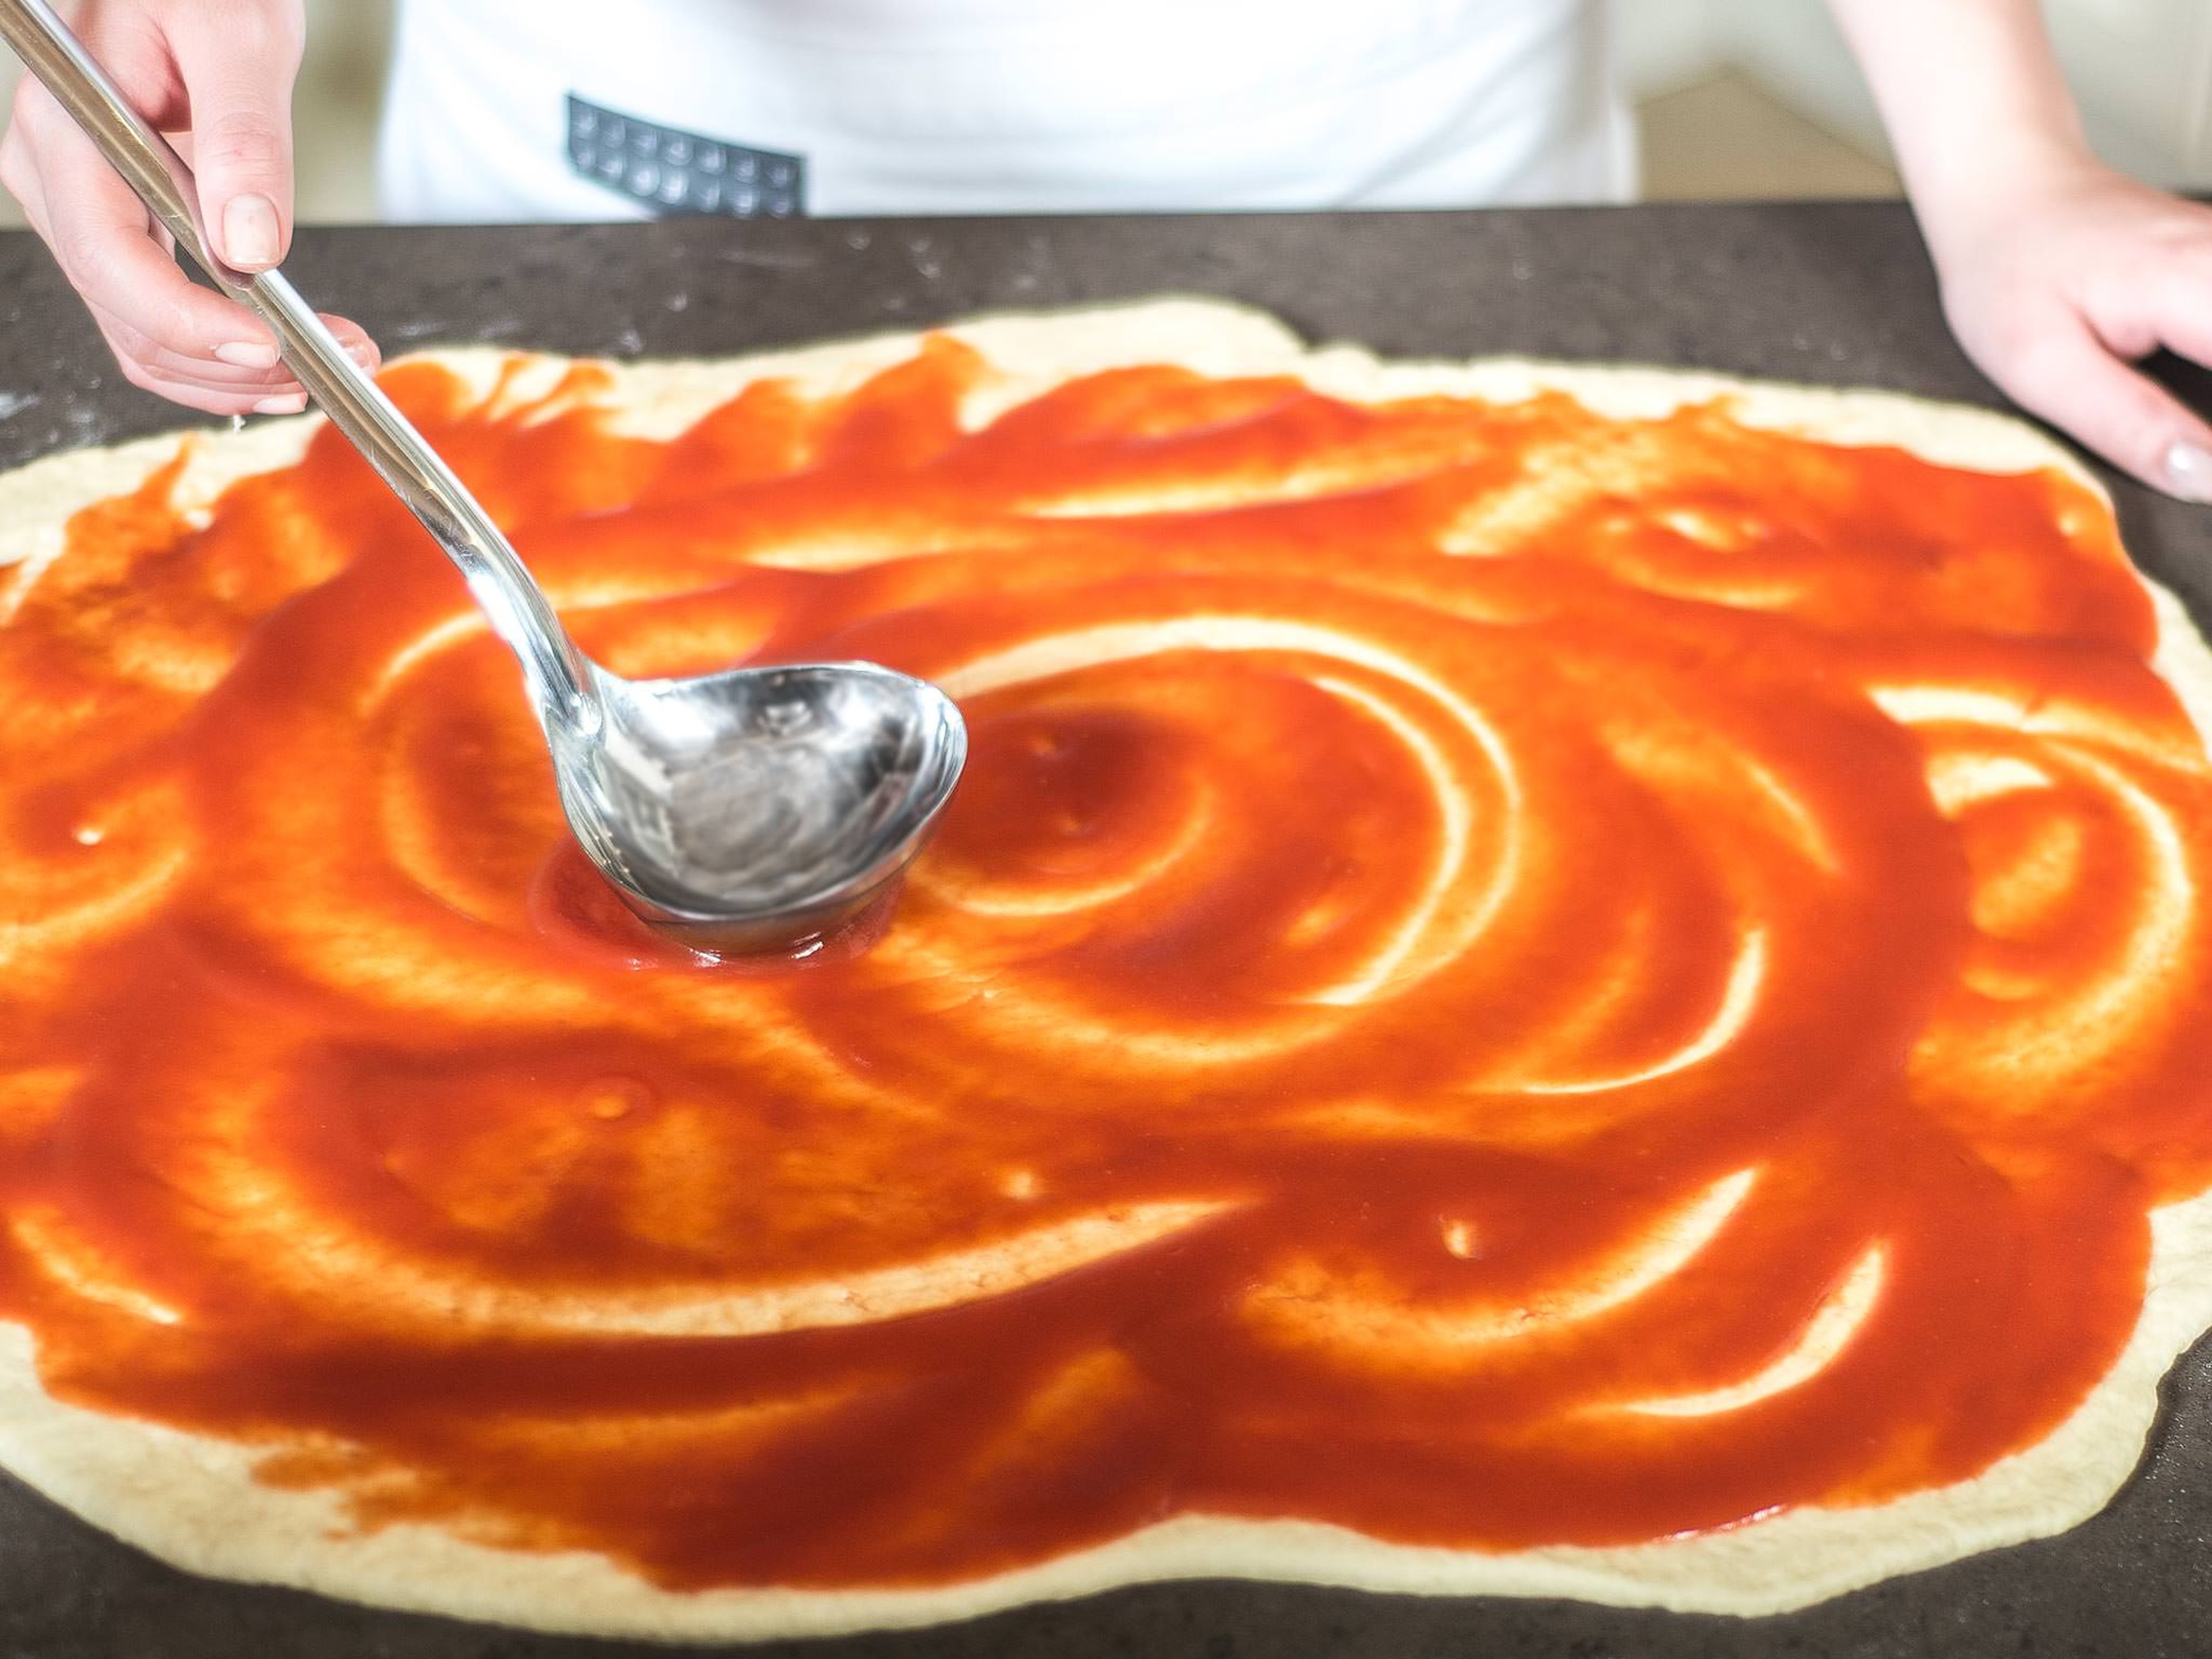 Roll the dough out flat onto a floured work surface and spread with crushed tomatoes.